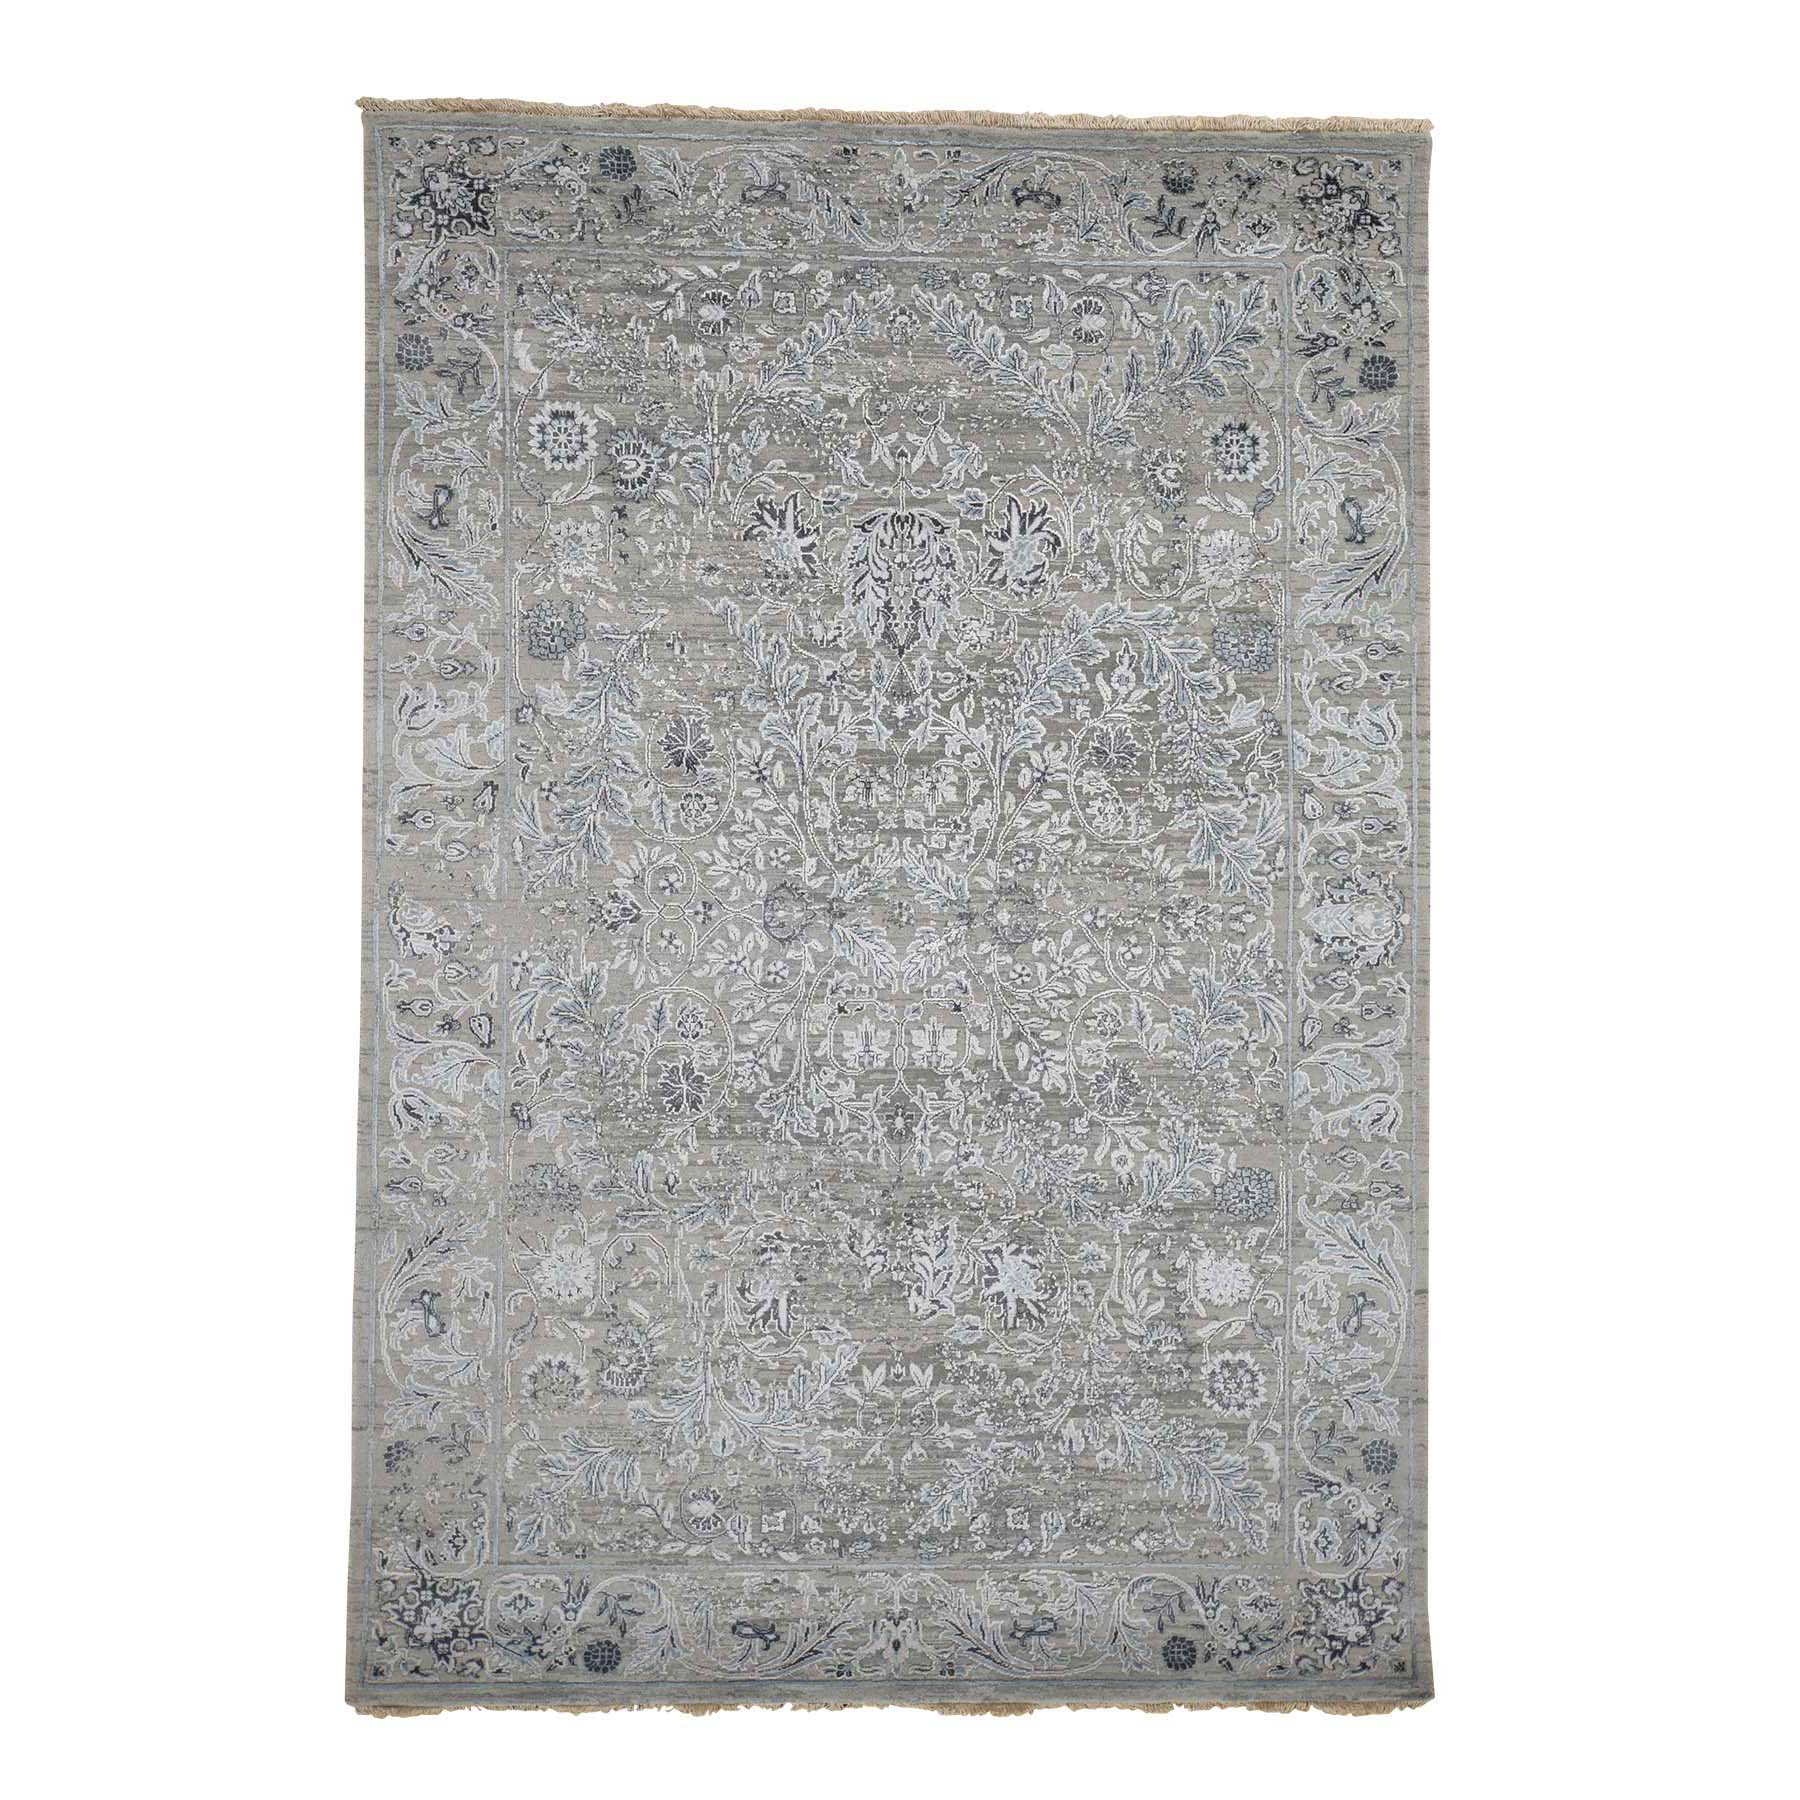 6'1"x9' Grey Transitional Kashan Design with Wool and Silk Hand Woven Rug 